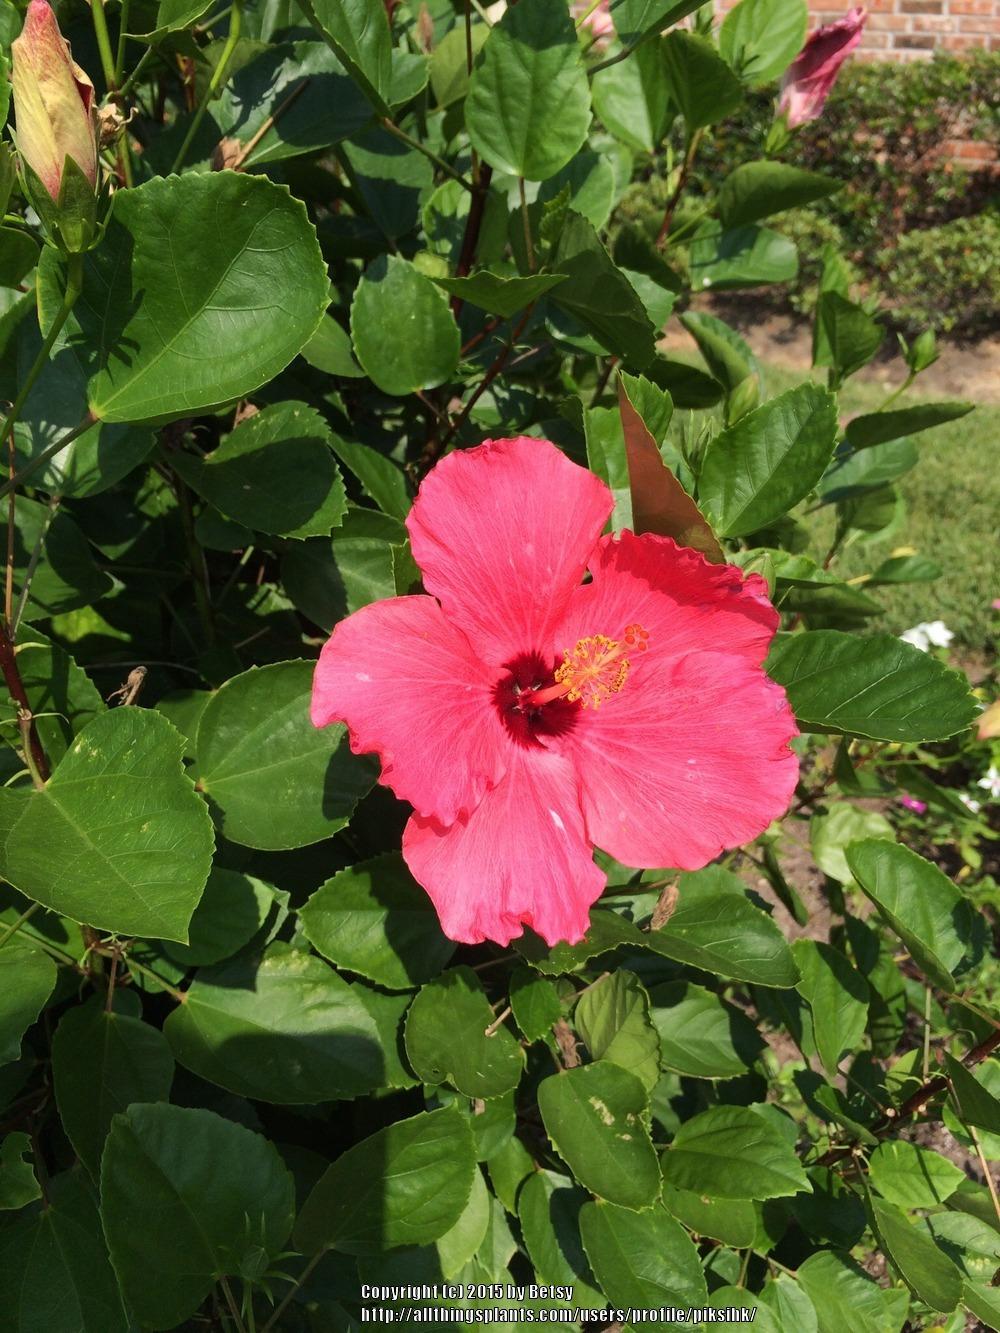 Photo of Hibiscus uploaded by piksihk